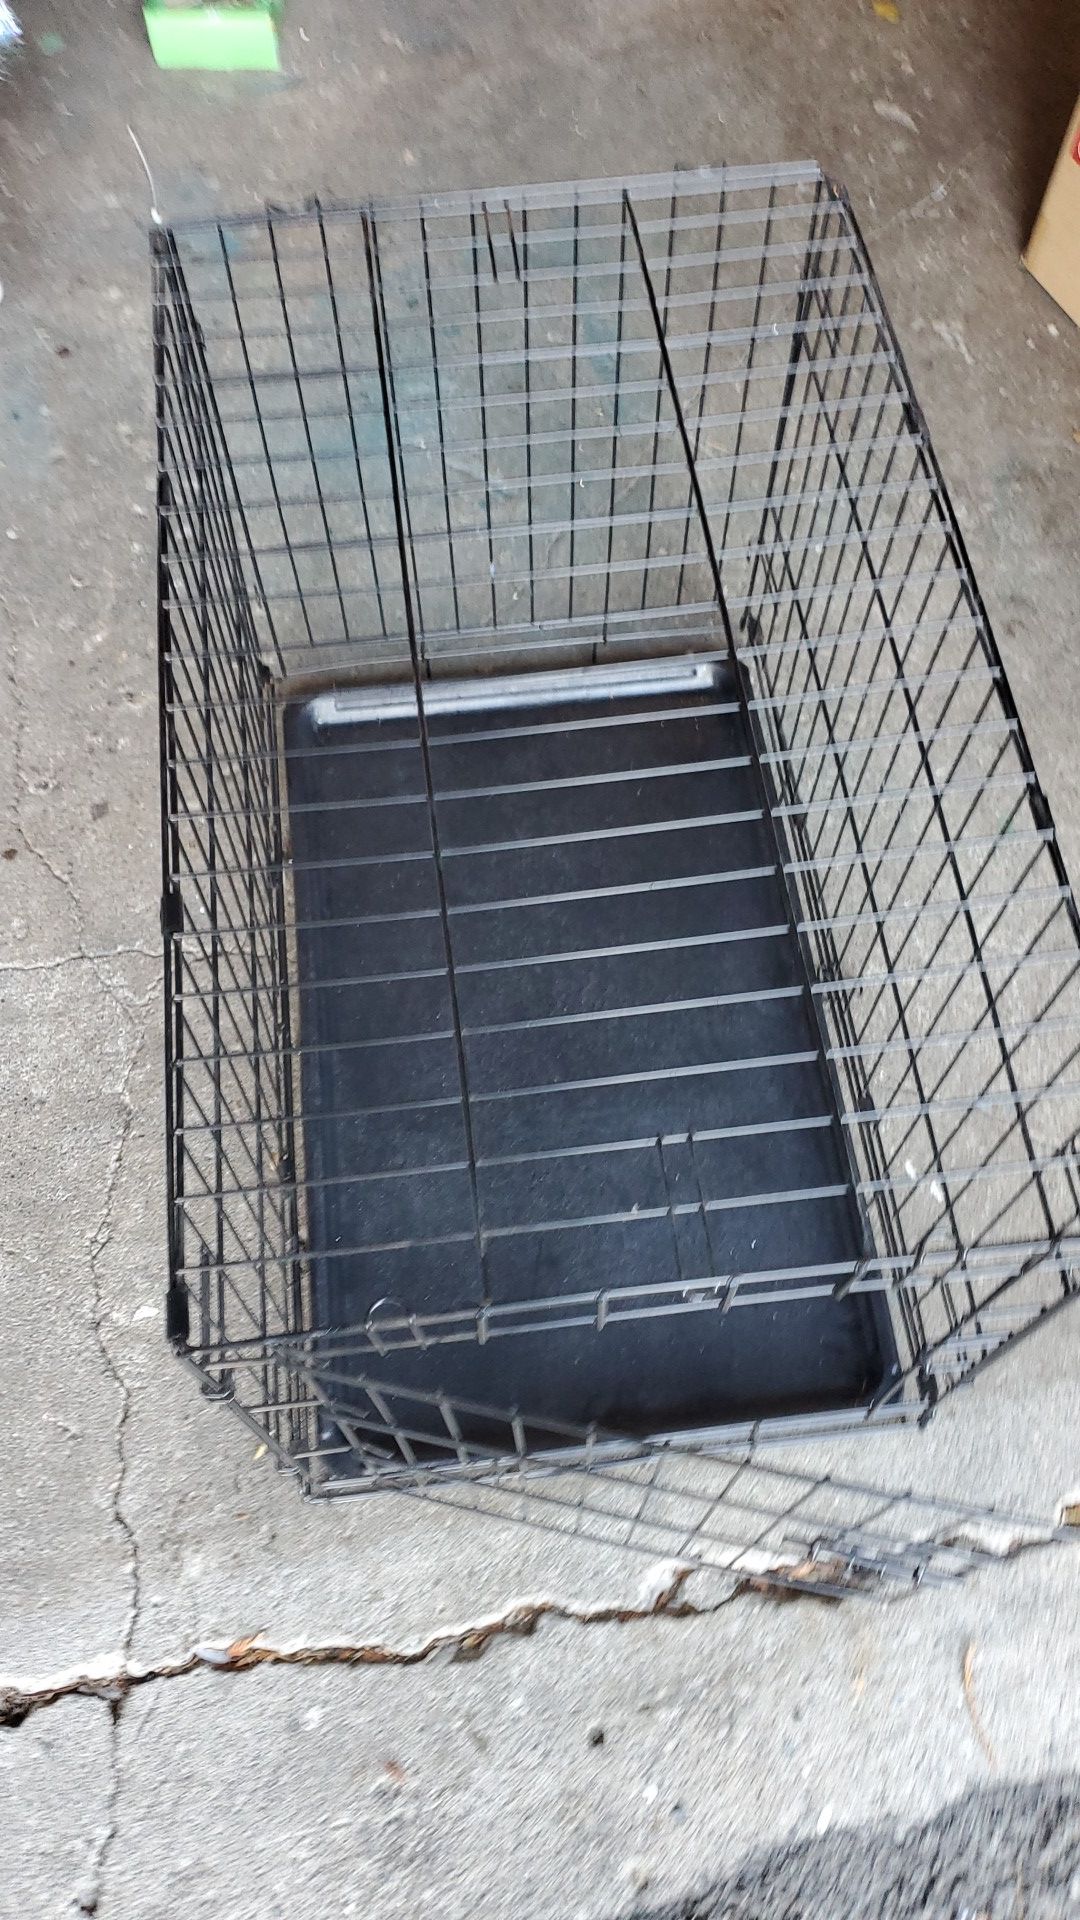 Dog kennel/crate